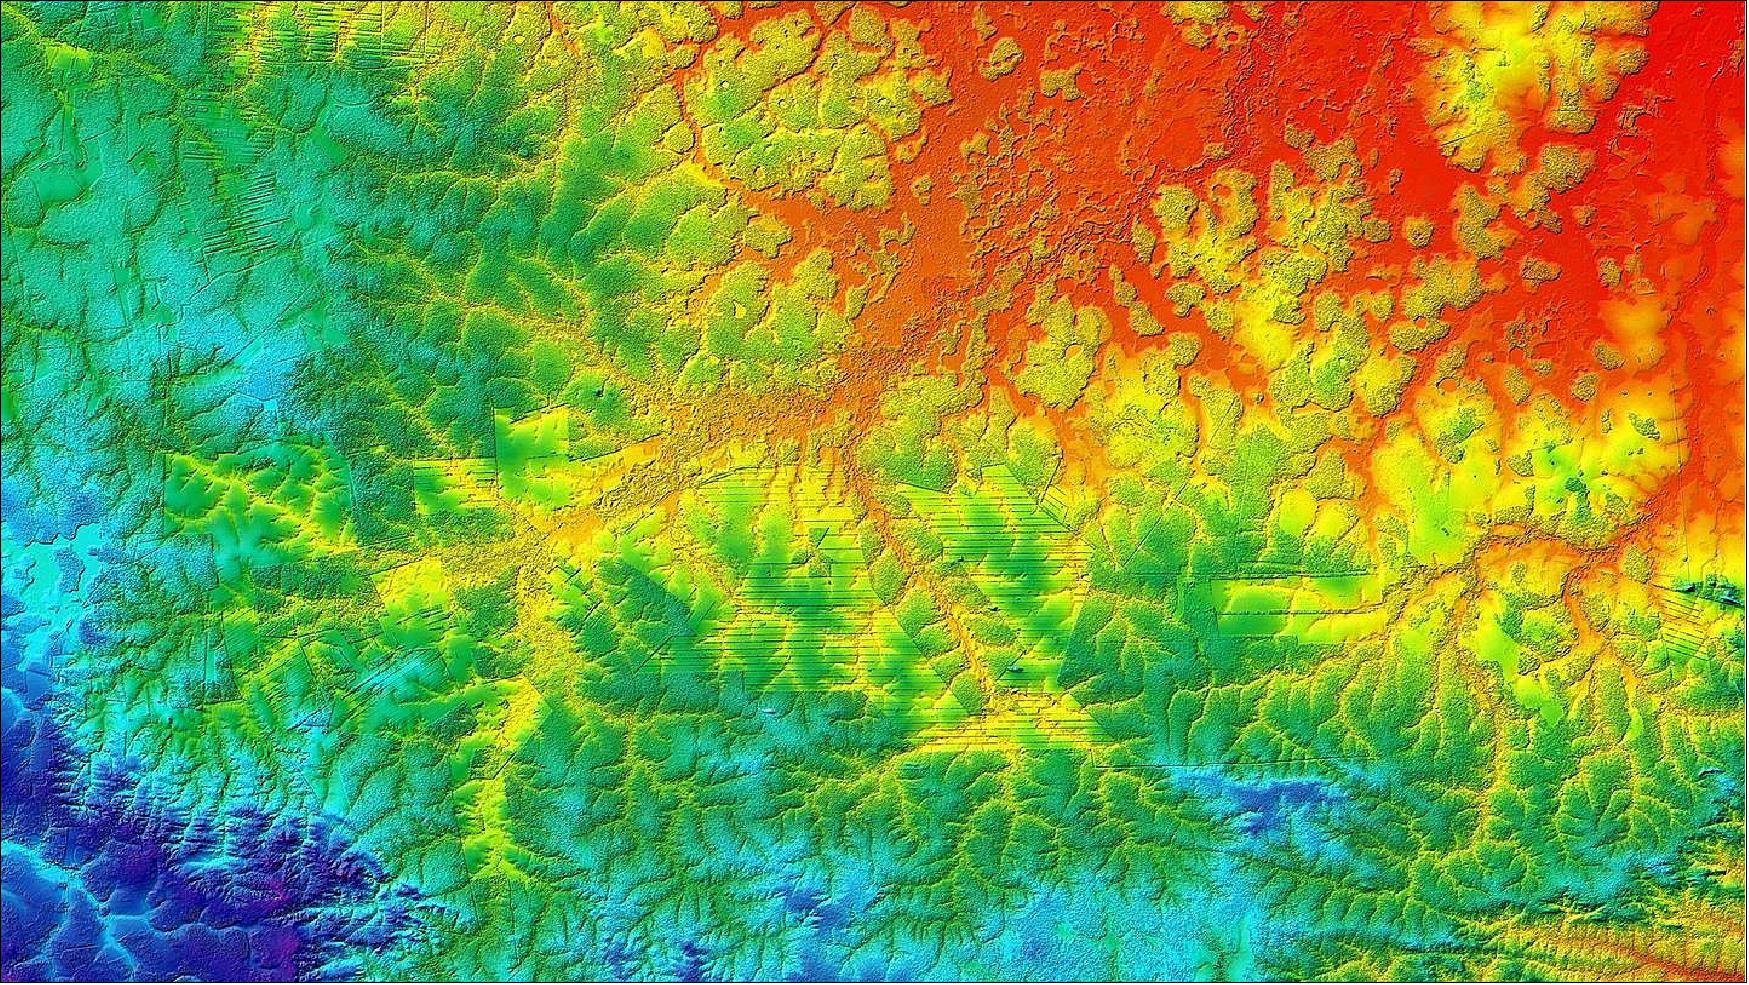 Figure 22: TSX/TDX image of rainforest clearing in Bolivia: At first glance, nature seems untouched - forest areas crossed by rivers and small mountain chains, Upon close inspection, one can see strip-like structure - wetland surfaces cleared for plantations (image credit: DLR, Ref. 31)